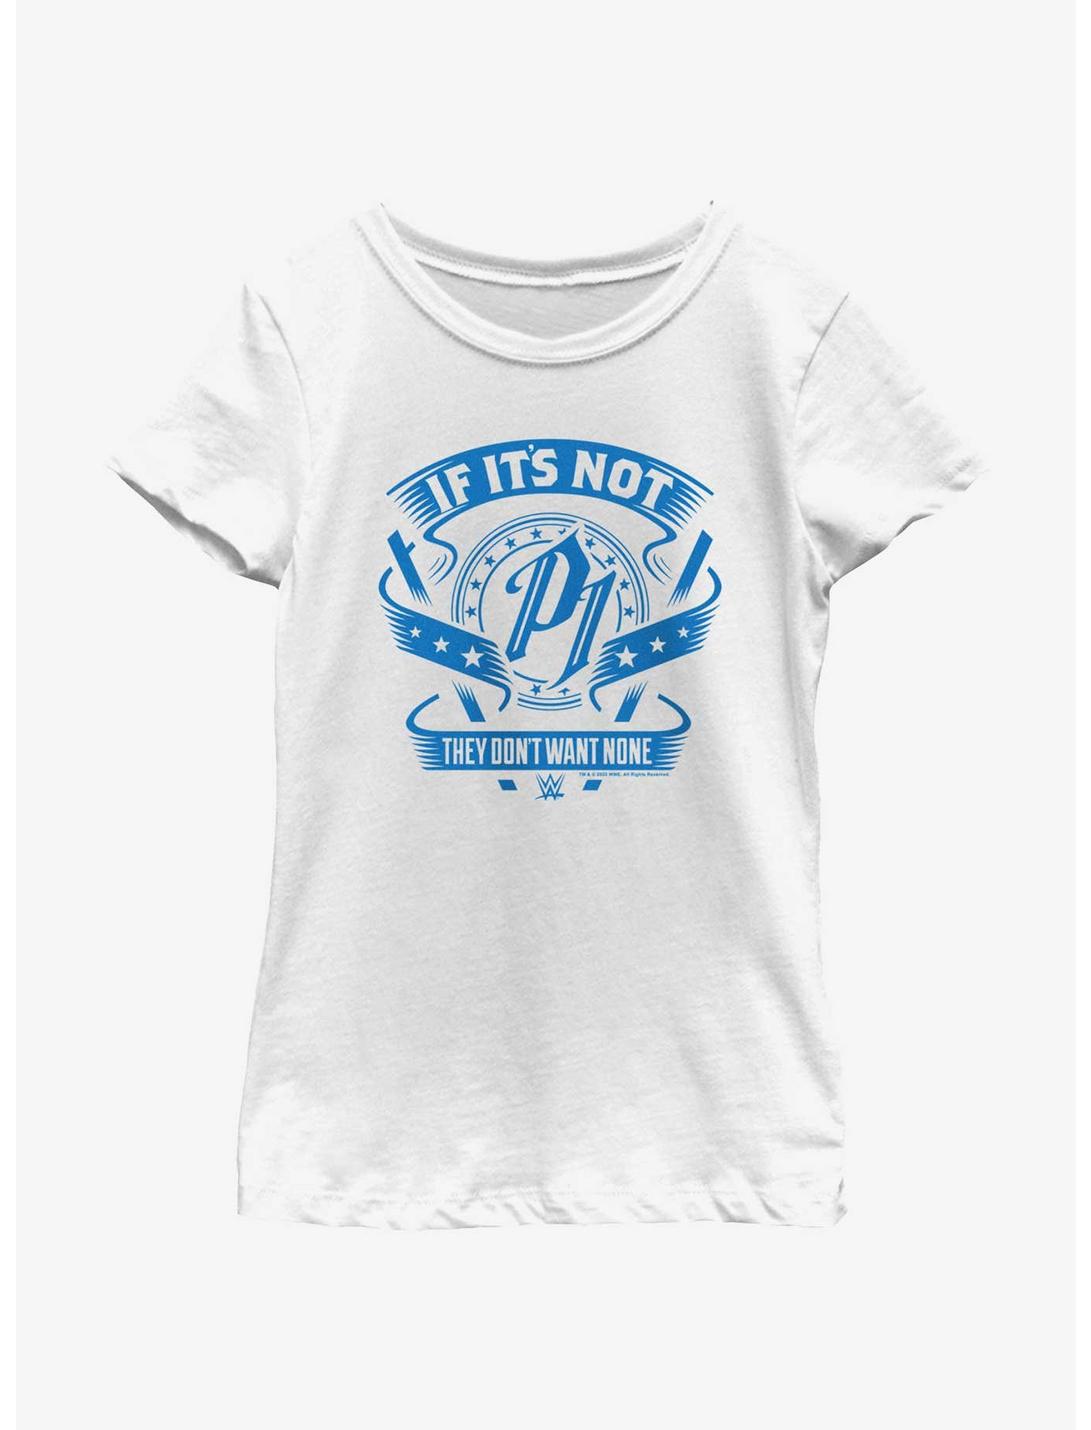 WWE AJ Styles They Don't Want None Youth Girls T-Shirt, WHITE, hi-res